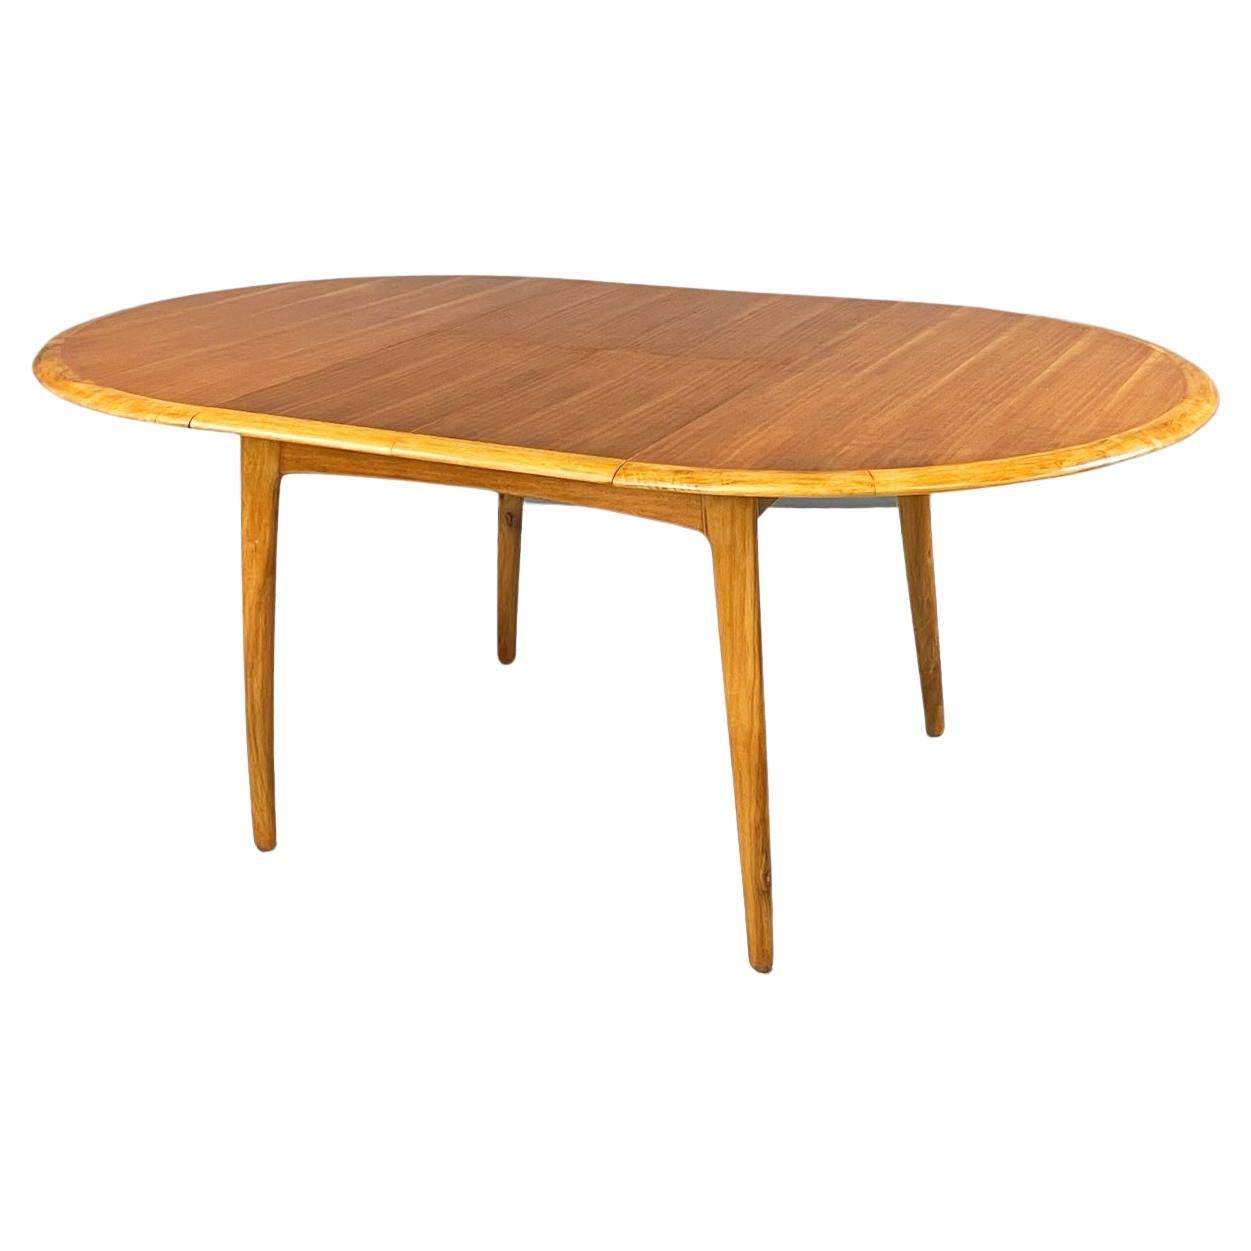 North Europa Midcentury Oval Round Wooden Dining Table with Extensions, 1960s For Sale